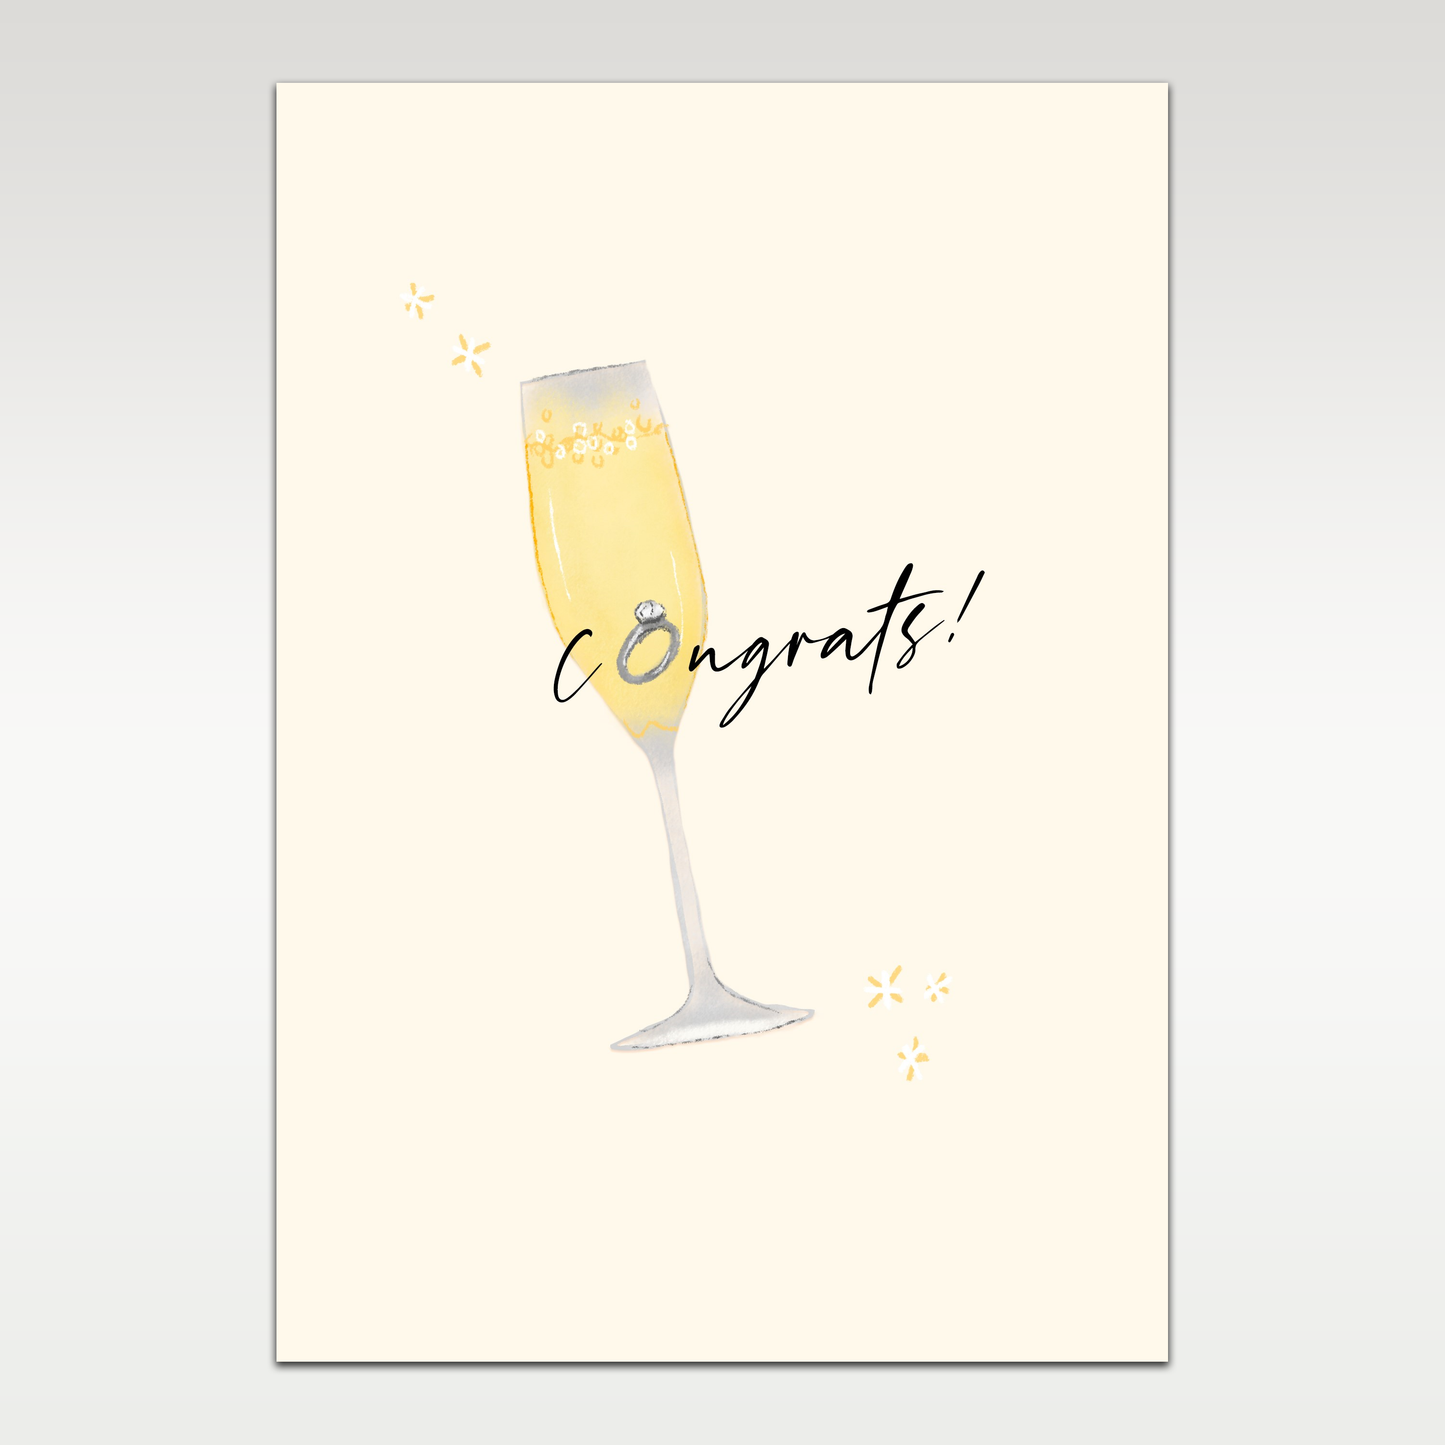 Congratulations Champers Greetings card